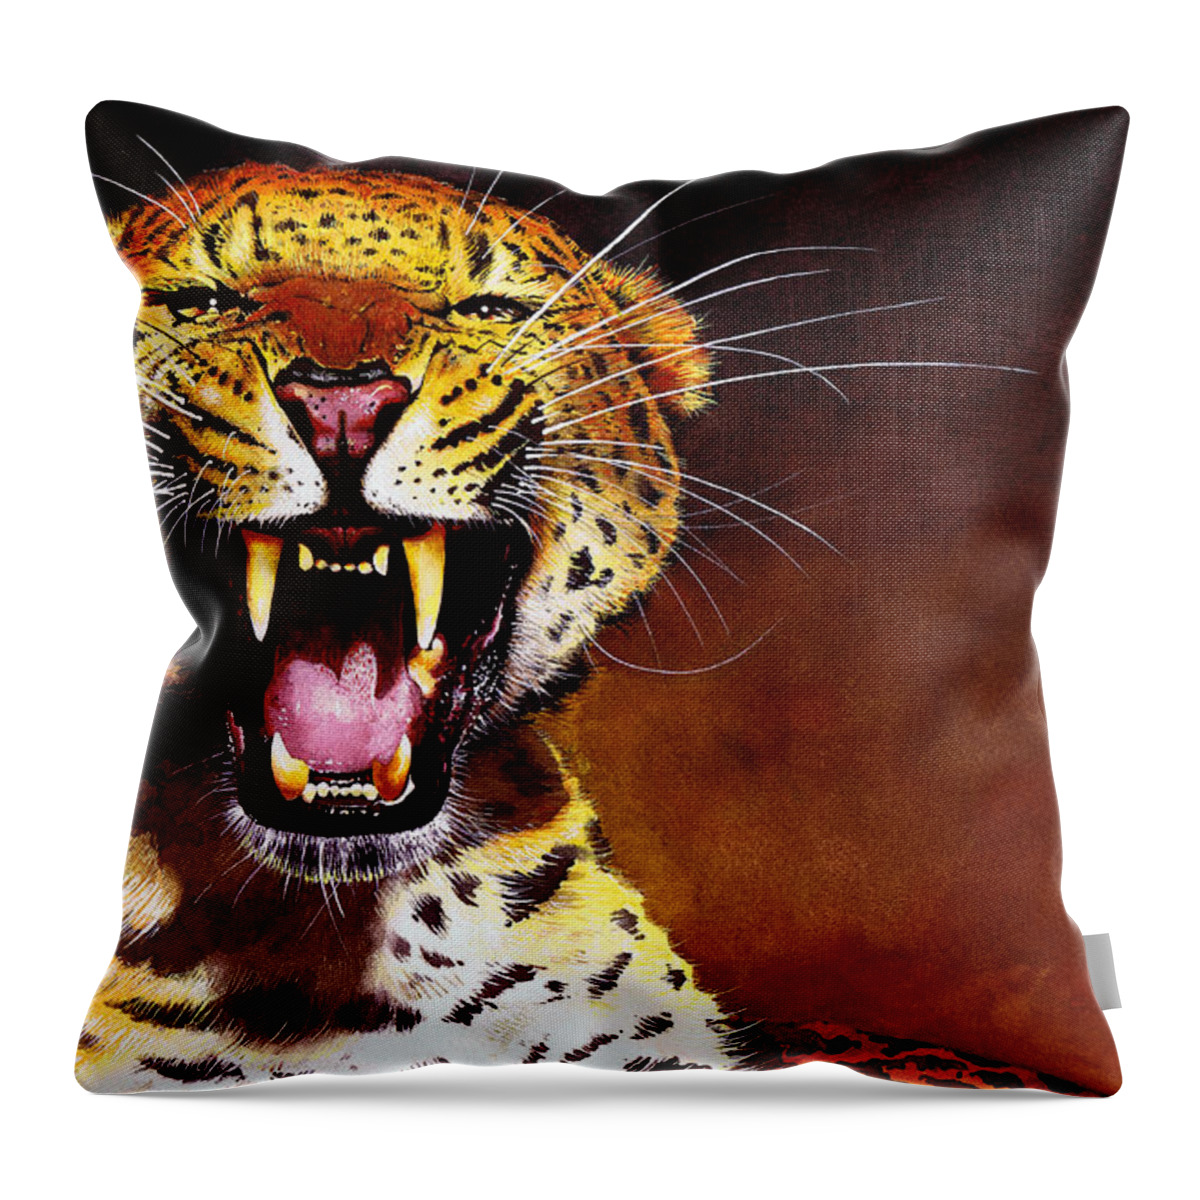 Leopard Throw Pillow featuring the painting Leopard by Paul Dene Marlor